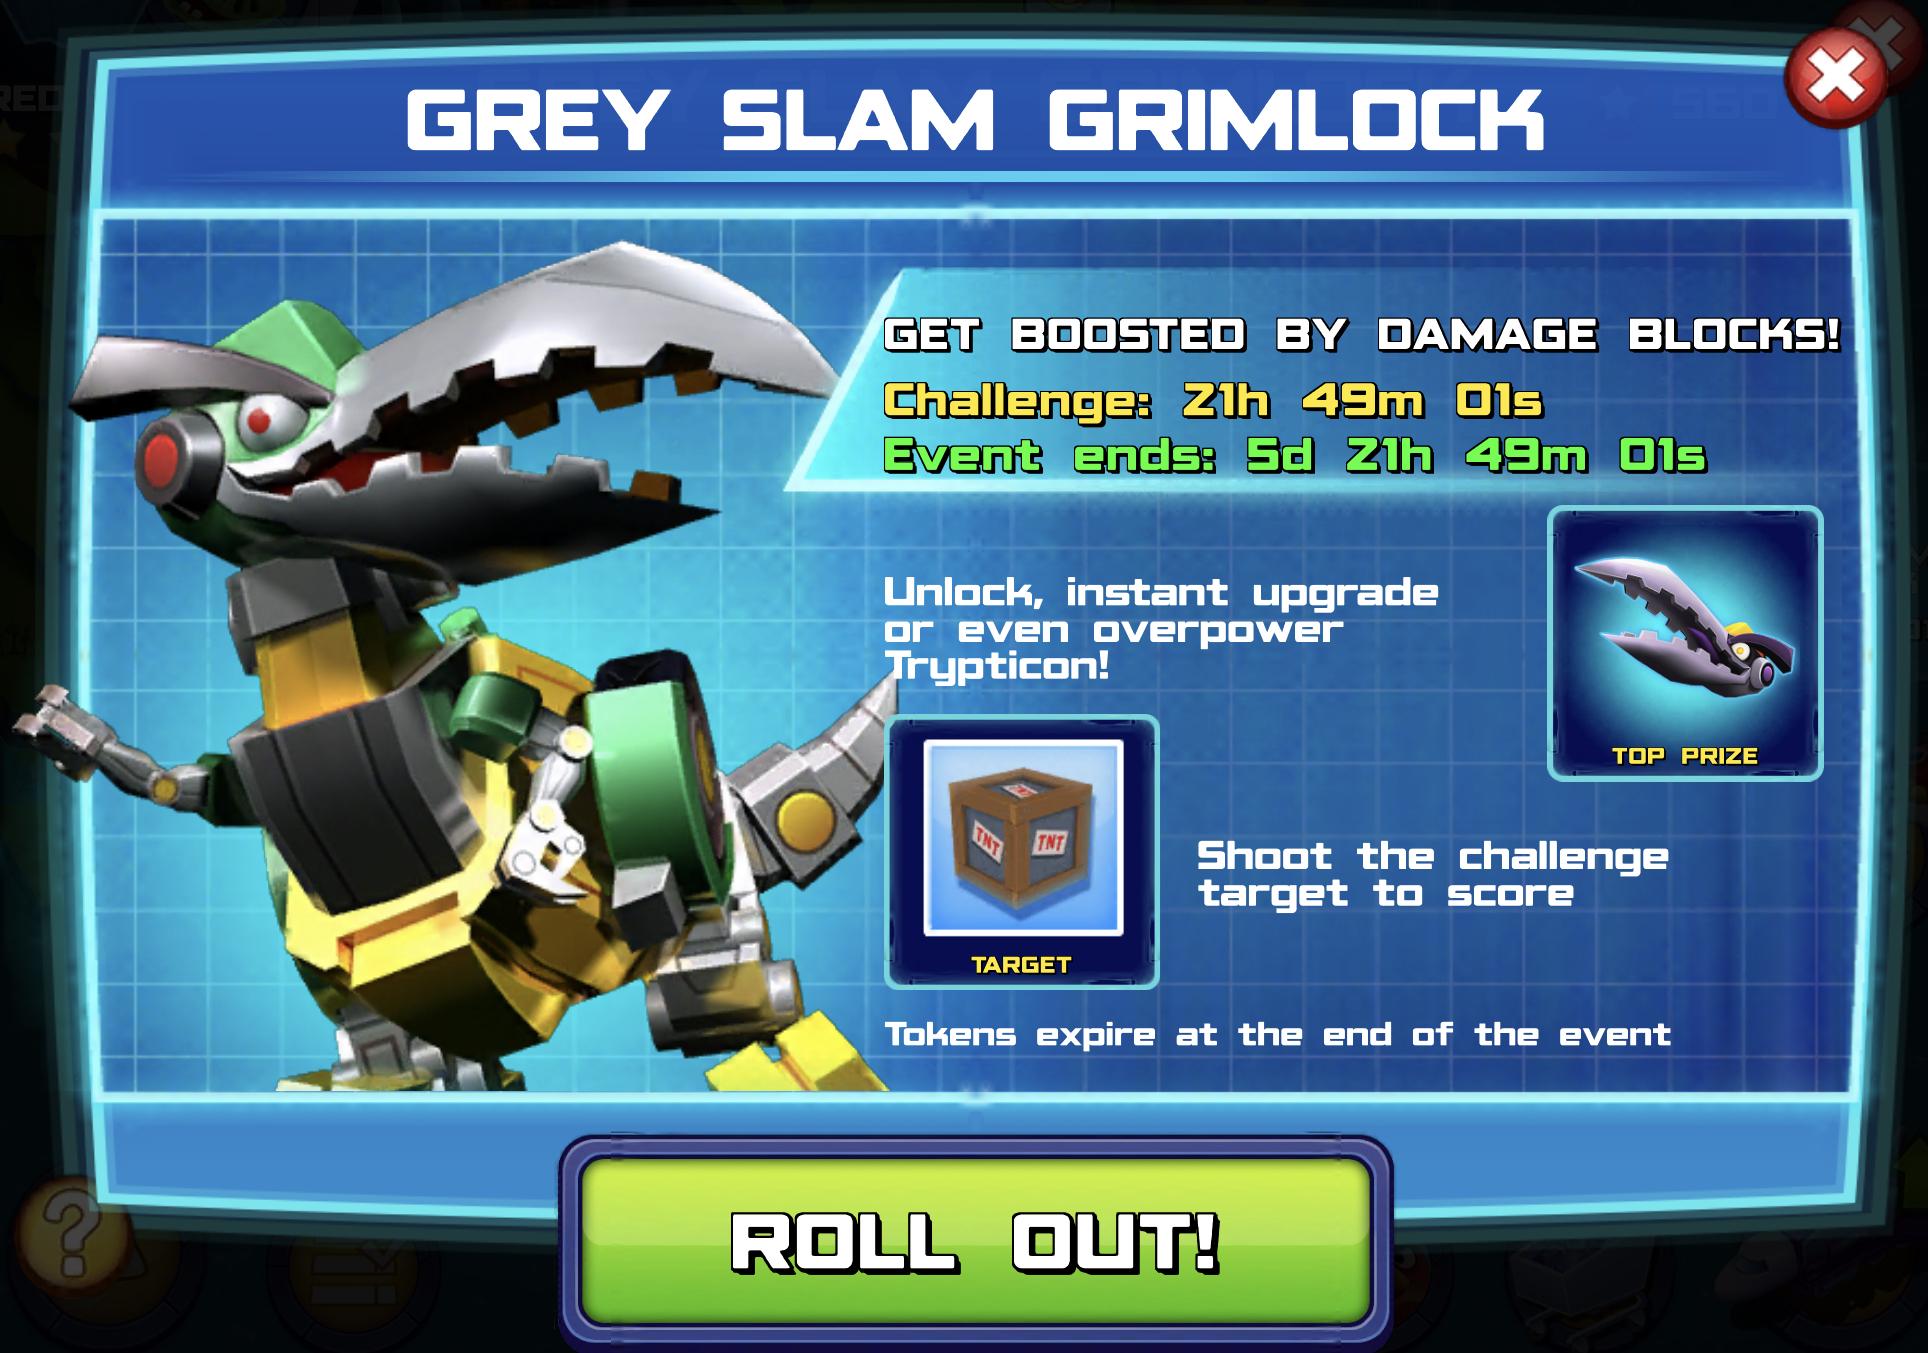 Banner for a Grey Slam Grimlock weekly event